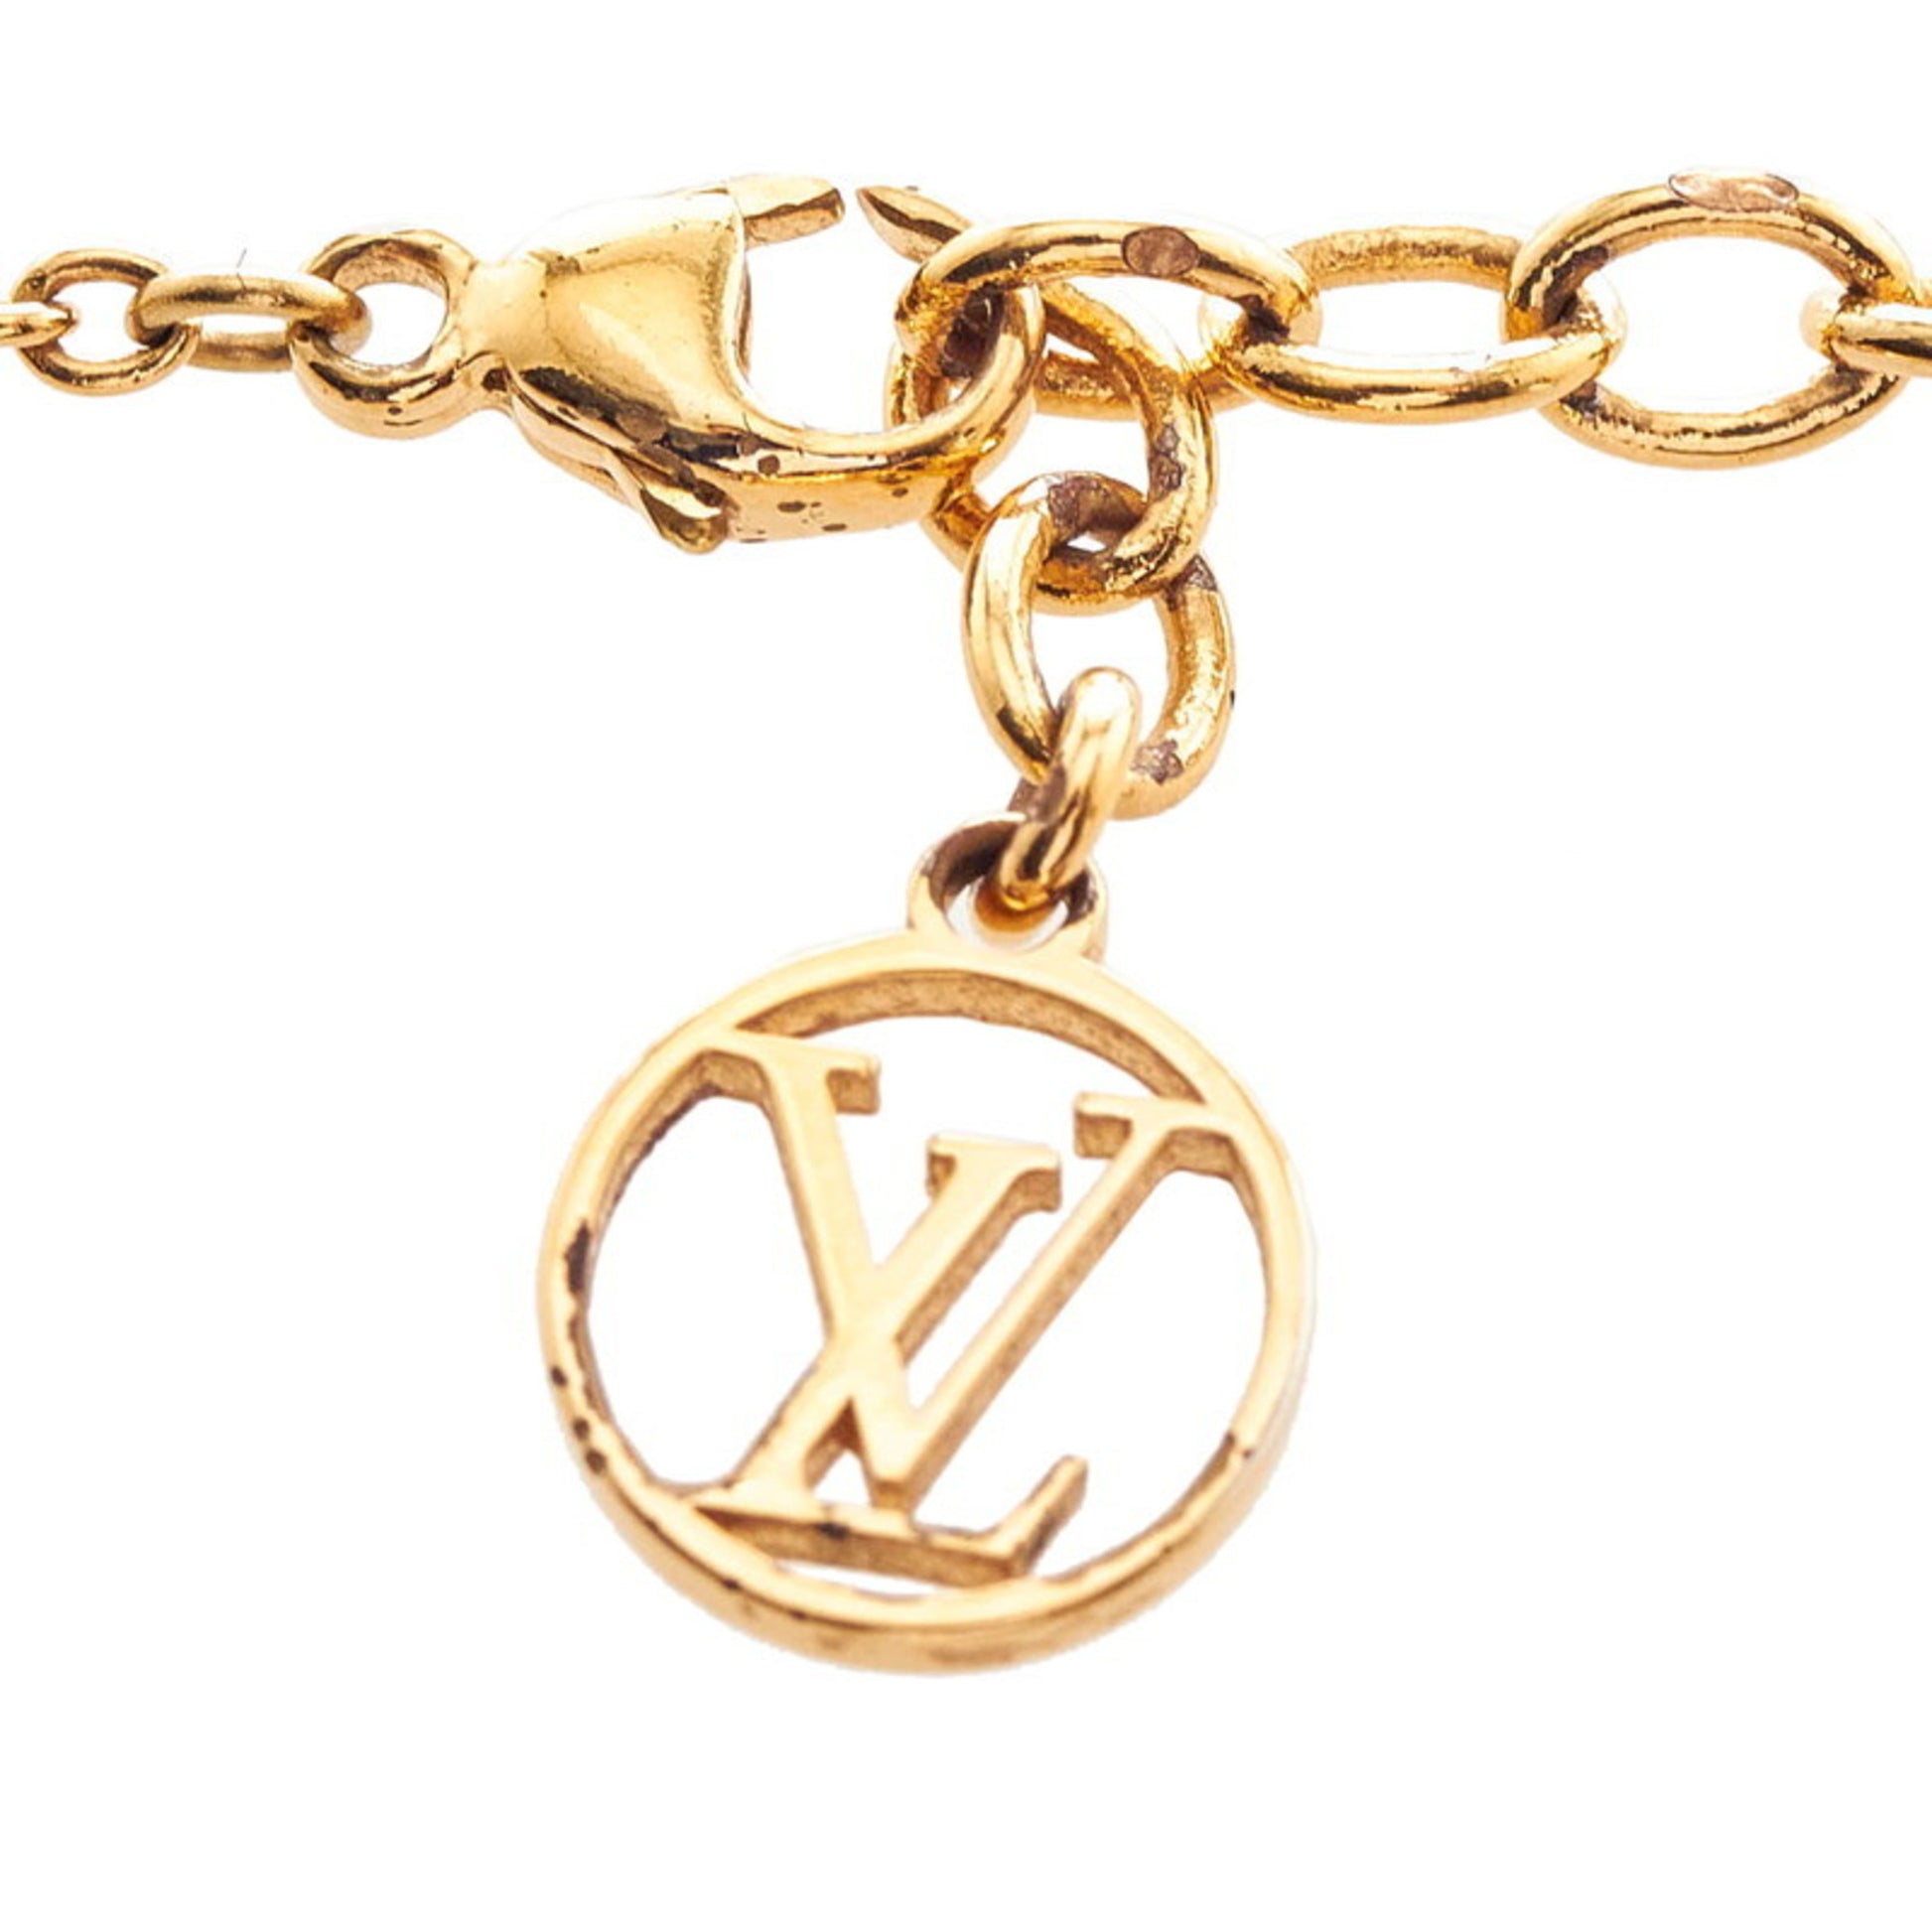 Louis+Vuitton+Essential+V+Perle+Necklace+Gold+Plated+Chain+Pearl+Resin+M68358  for sale online